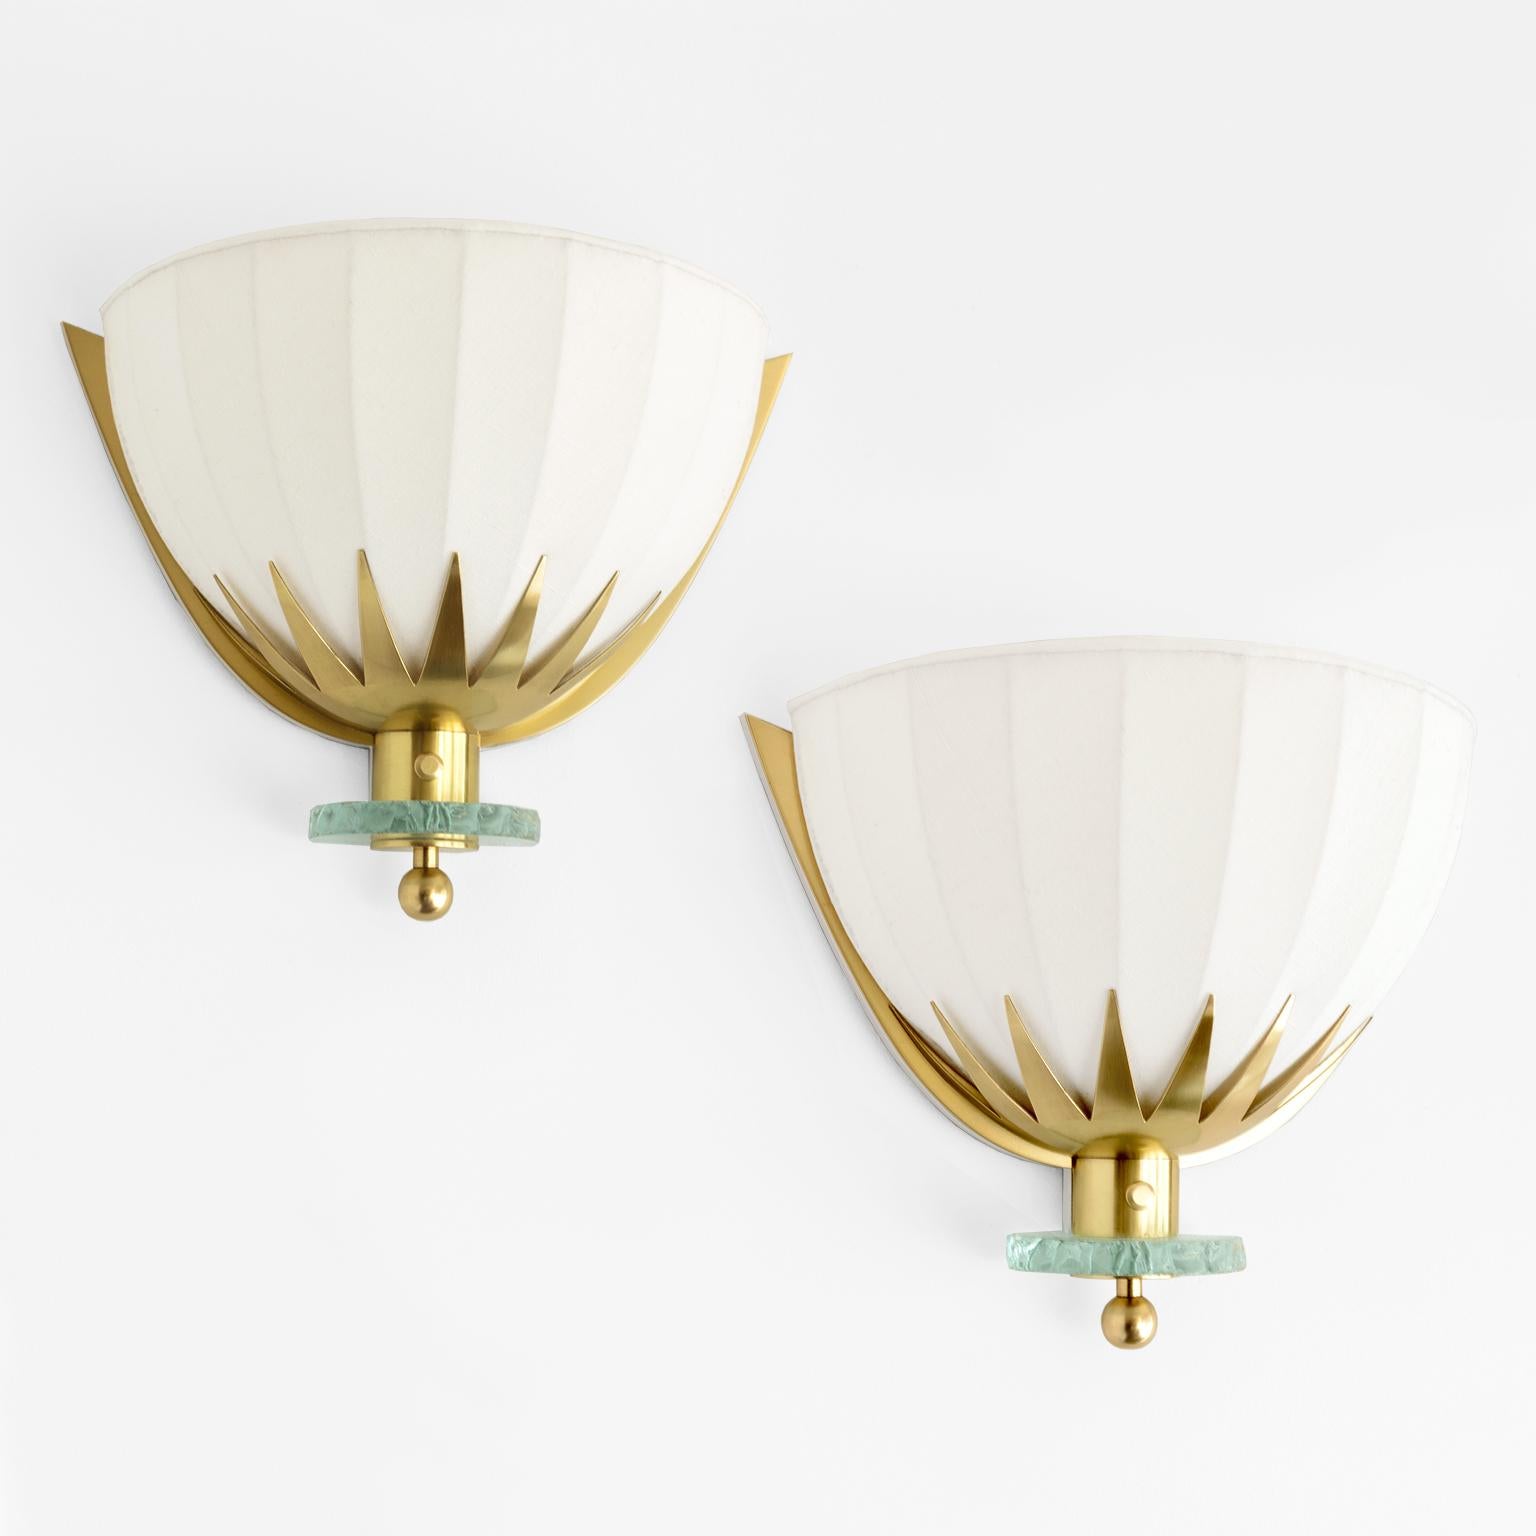 Swedish Art Deco demilune polished brass sconces with fanned fluted fabric covered shades. The brass frames have sunburst elements which hold the newly covered cotton-linen shades. The backplates are polished brass mounted on a painted wood frame, a